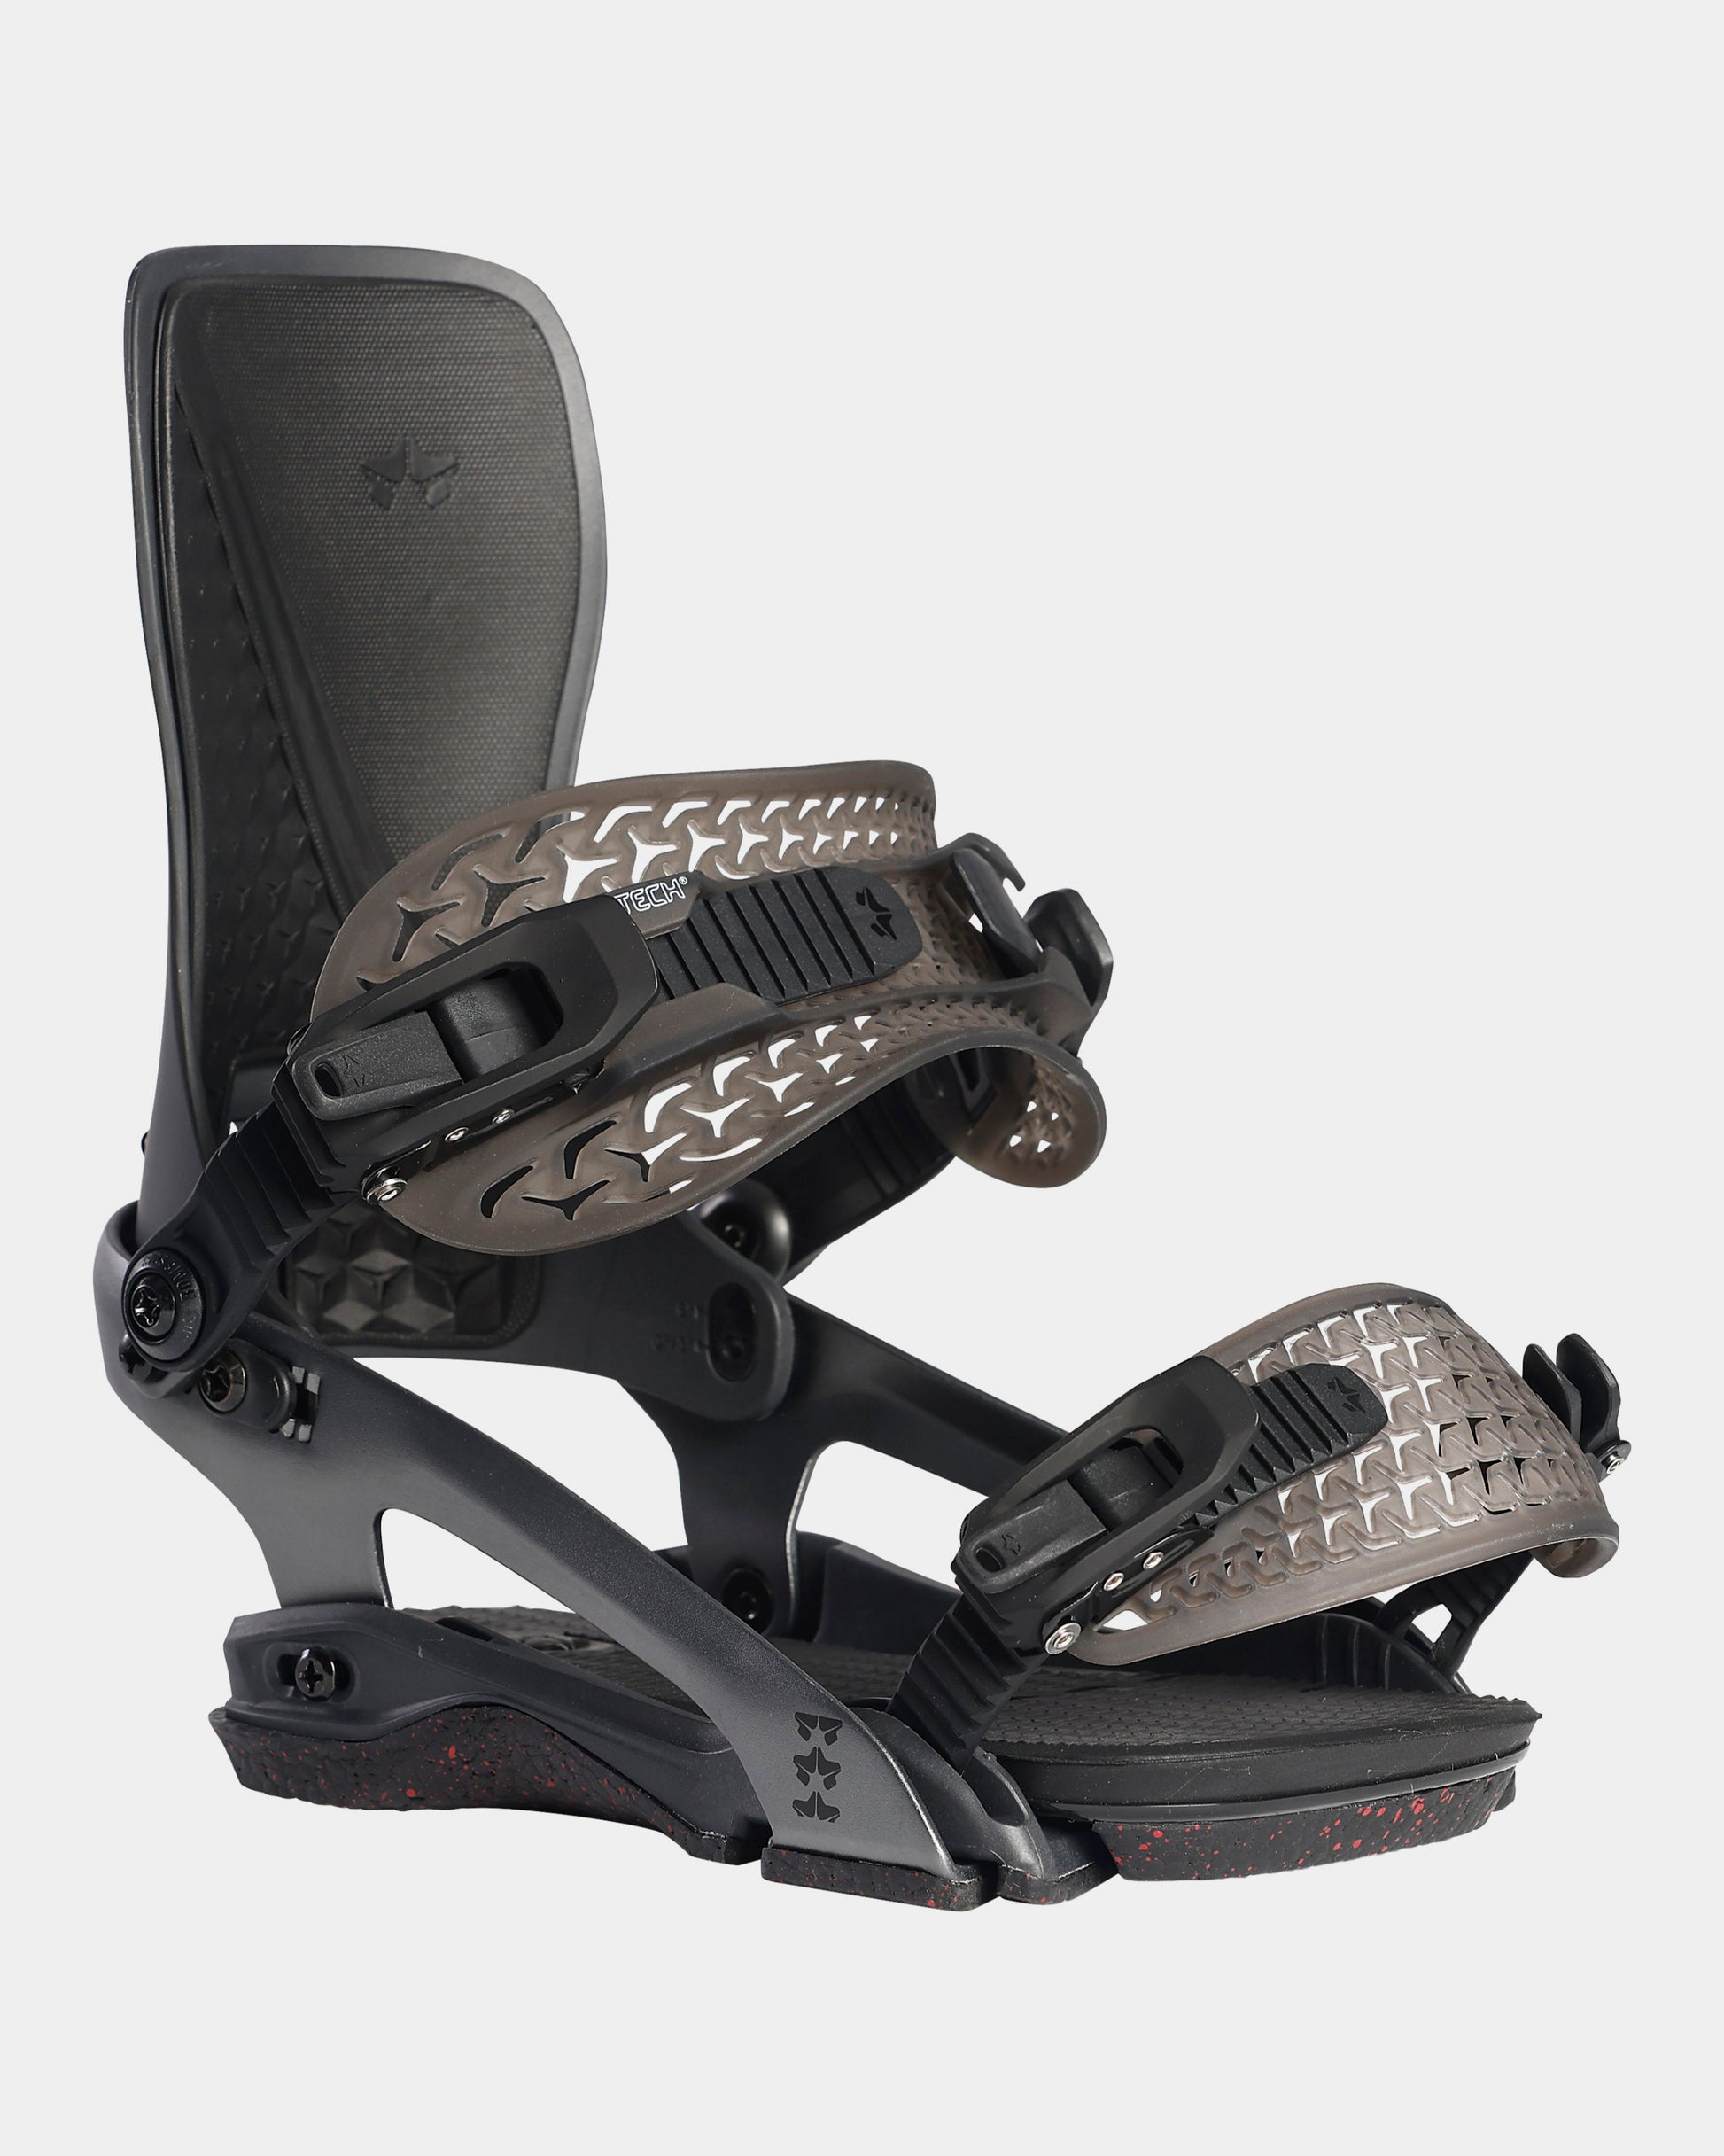 rome cleaver 2022 mens snowboard bindings product photo from back cover shot in studio color black grain